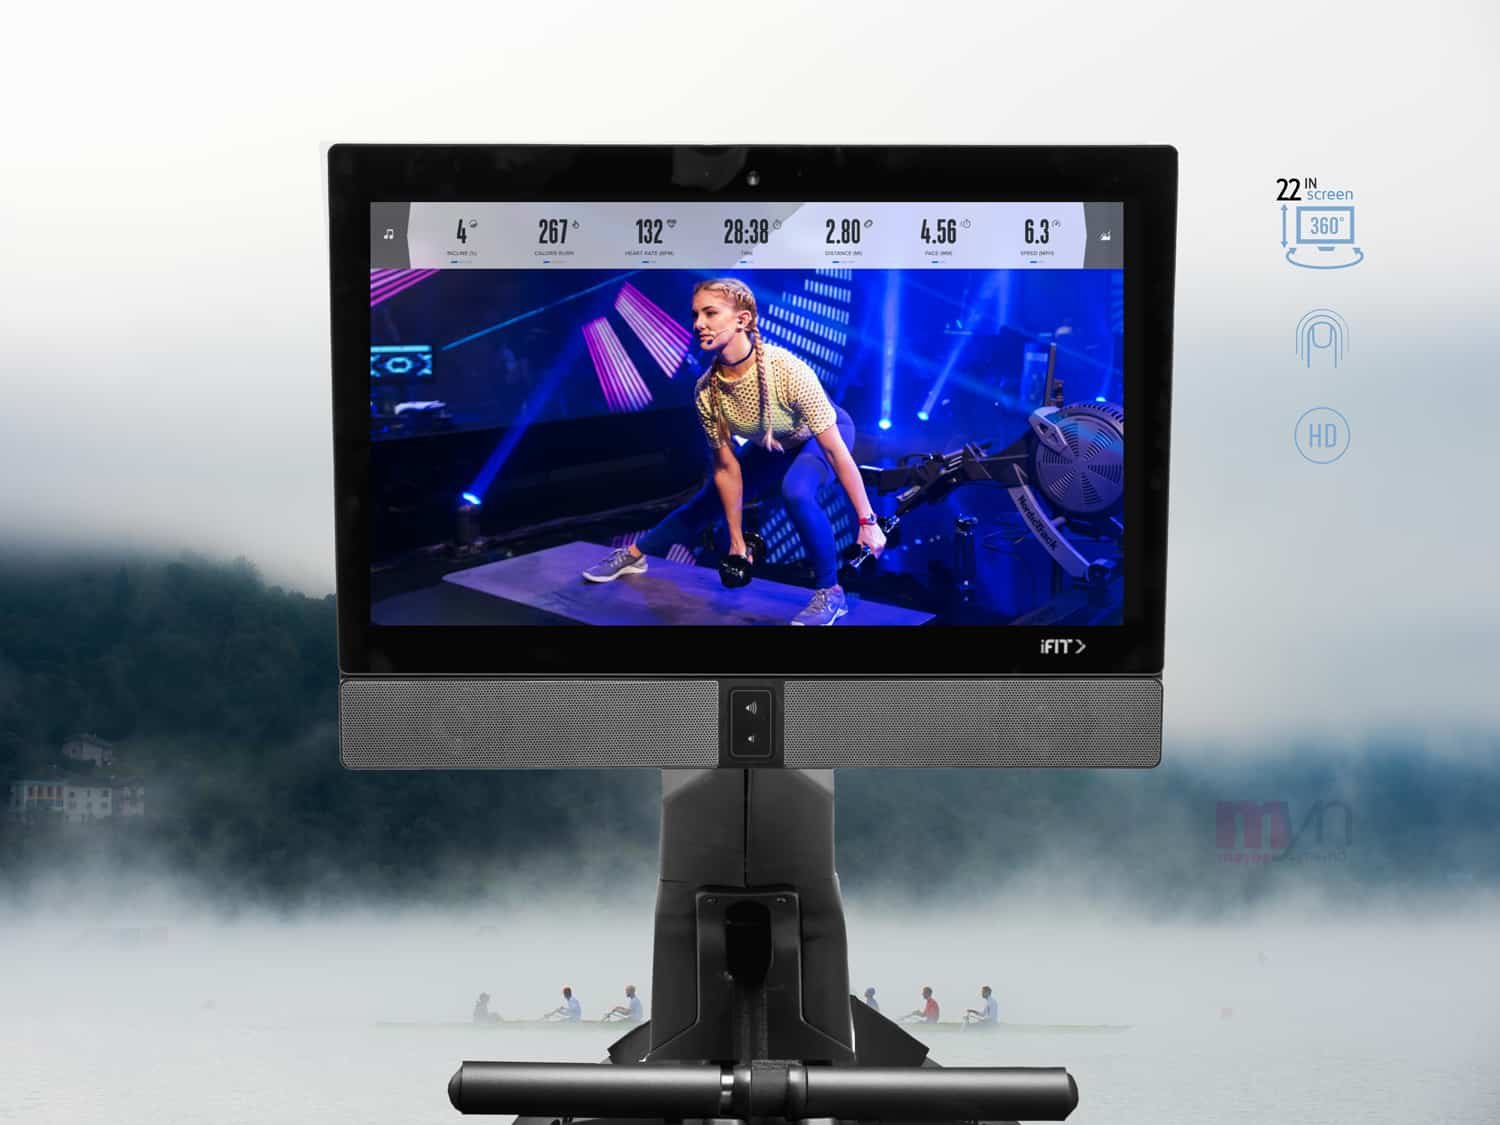 new-rw900-console-with-ifit-off-the-rower--training-alex-silver-fagan.jpg